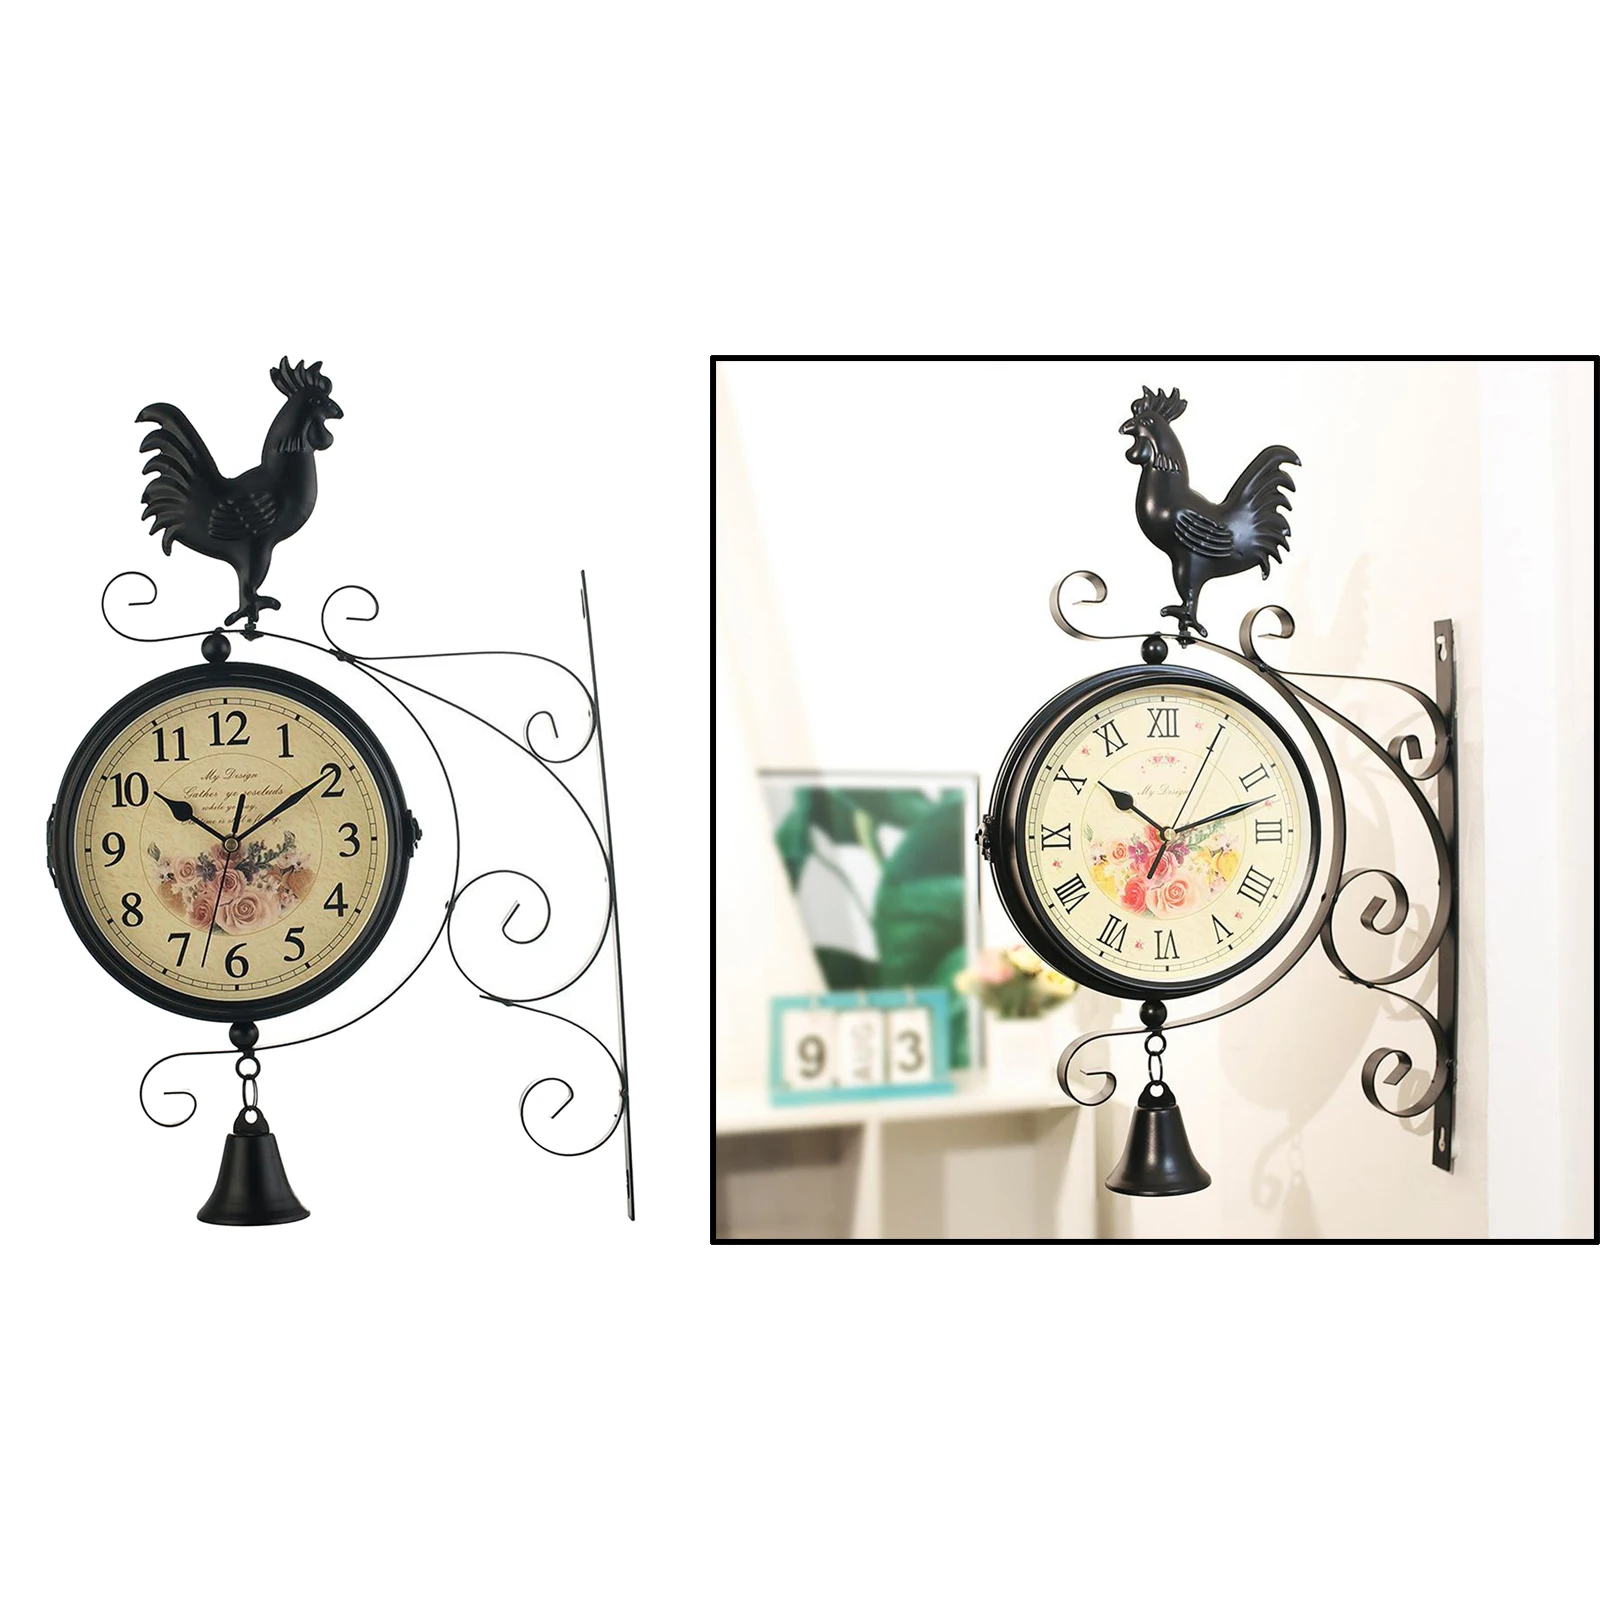 Outdoor Garden Wall Station Clock Double Sided Vintage Retro Home Decor Outdoor Wall Station Clock Sided